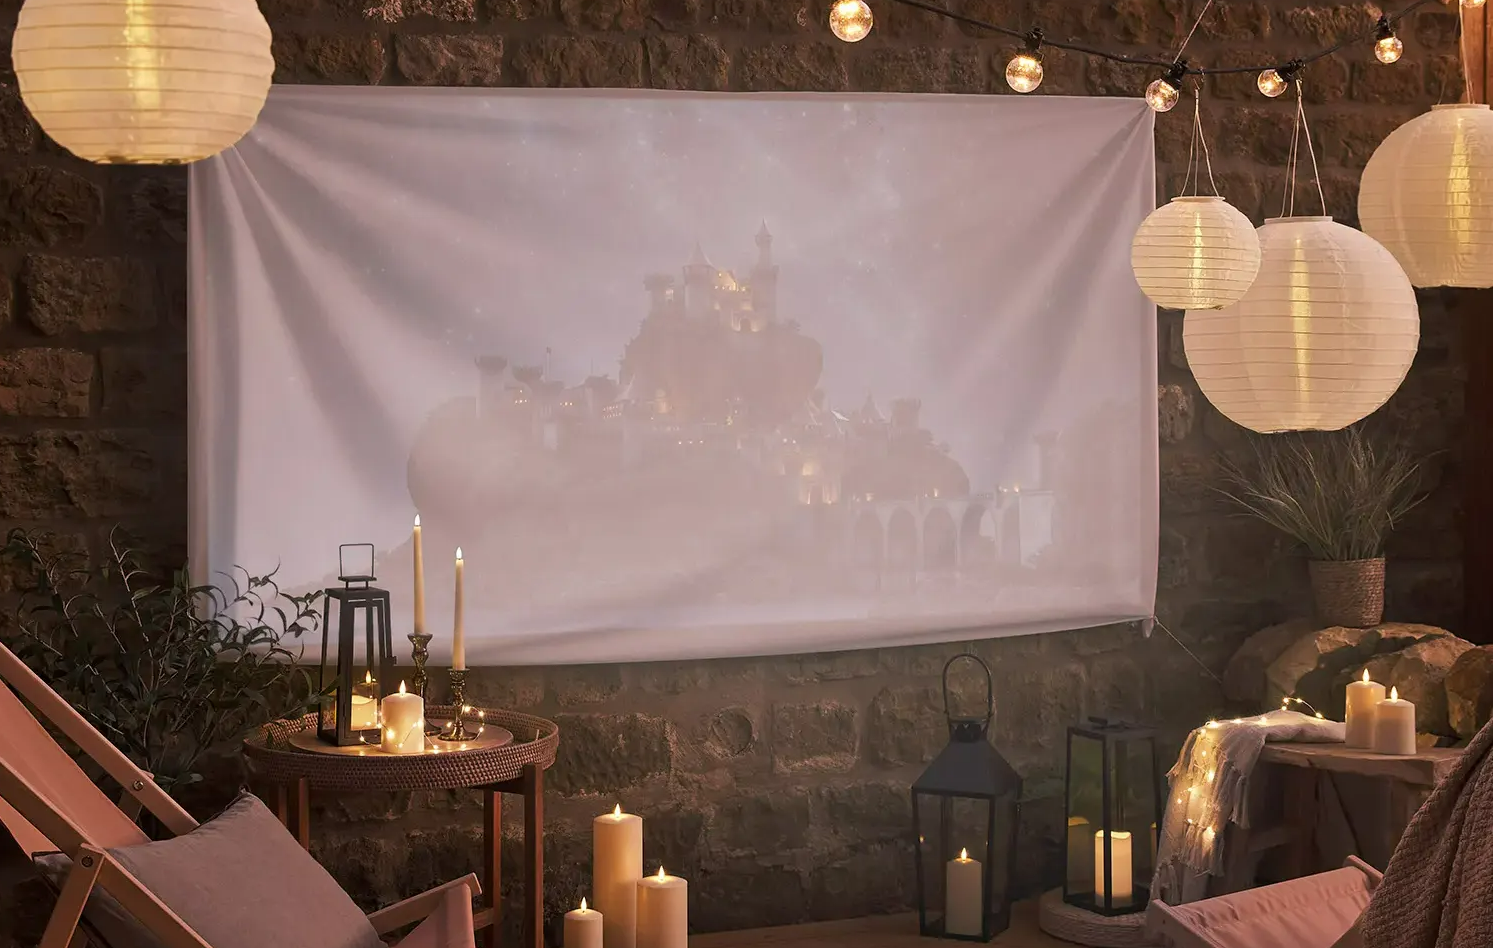 An outdoor movie night setting with hanging solar lanterns and festoon lights.